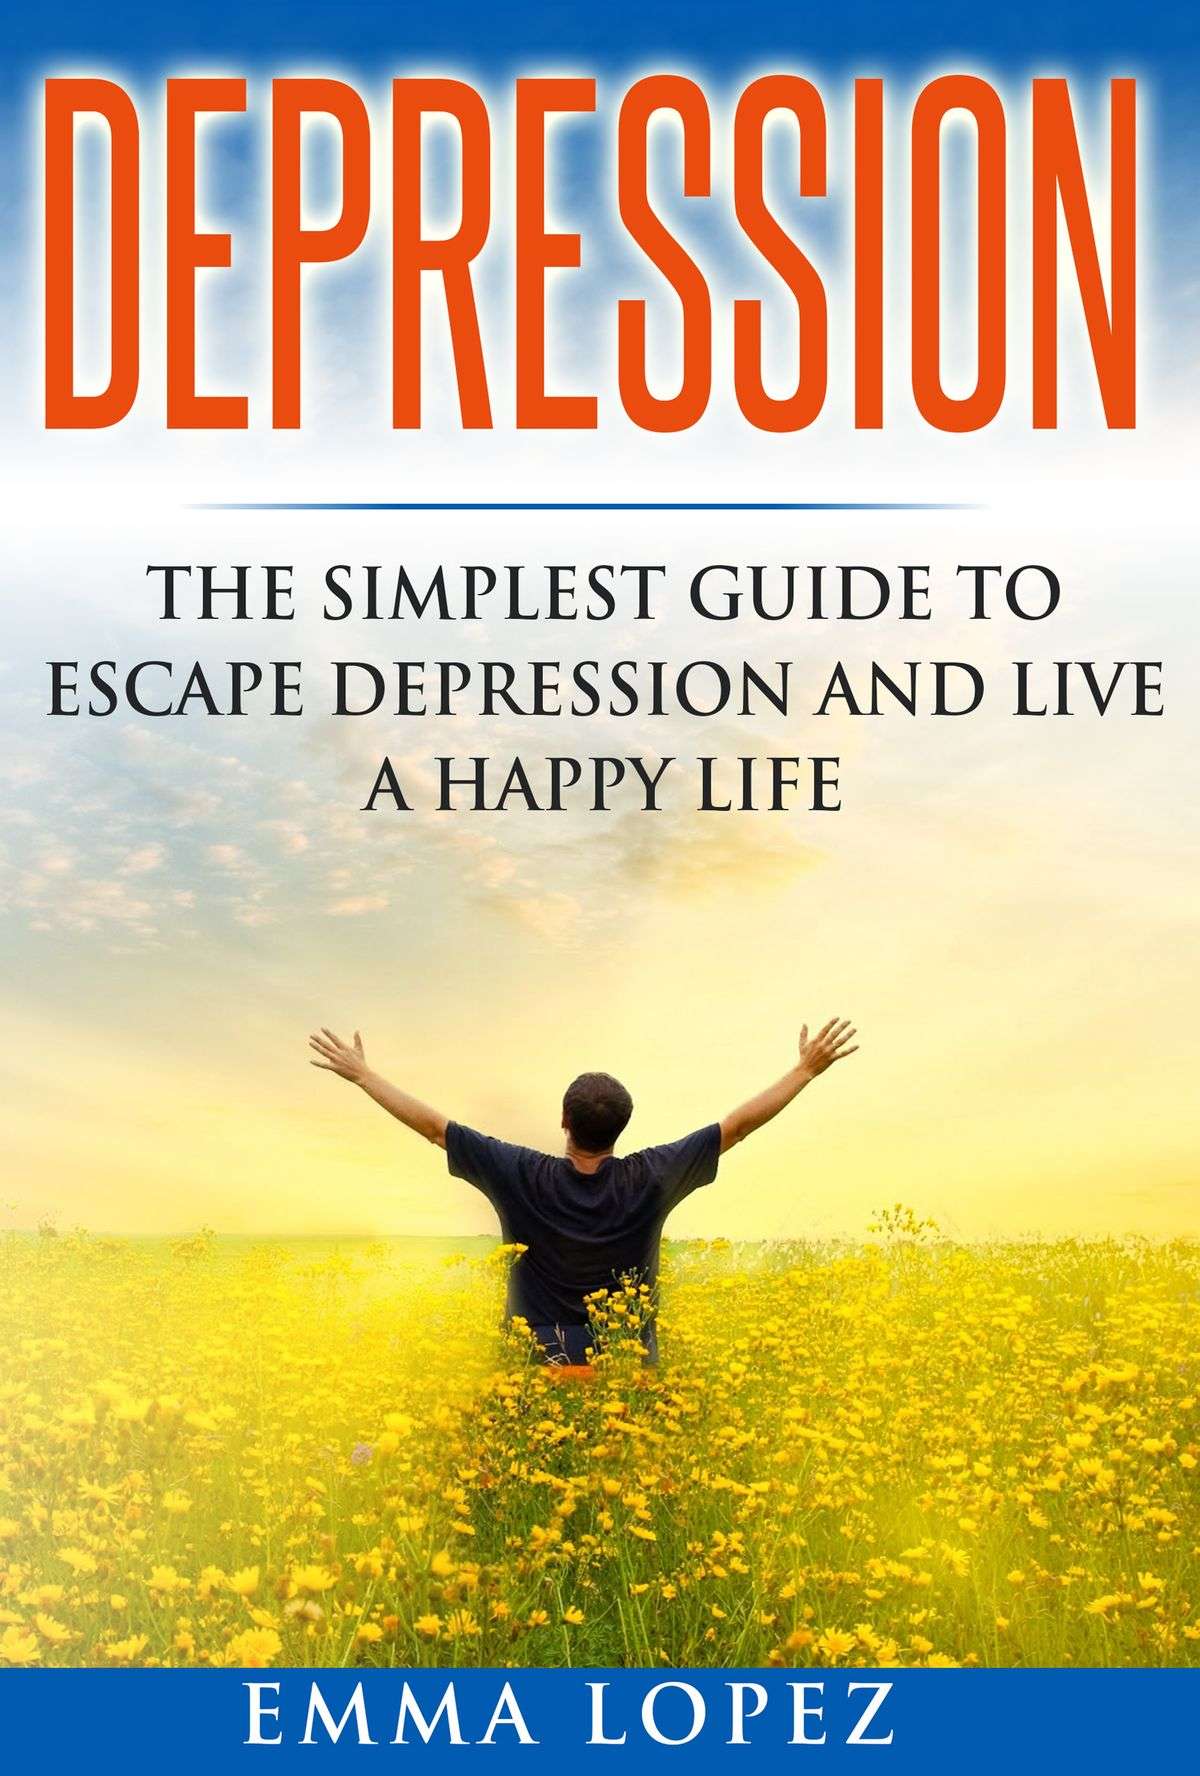 Depression: The Simplest Guide to Escape Depression and ...